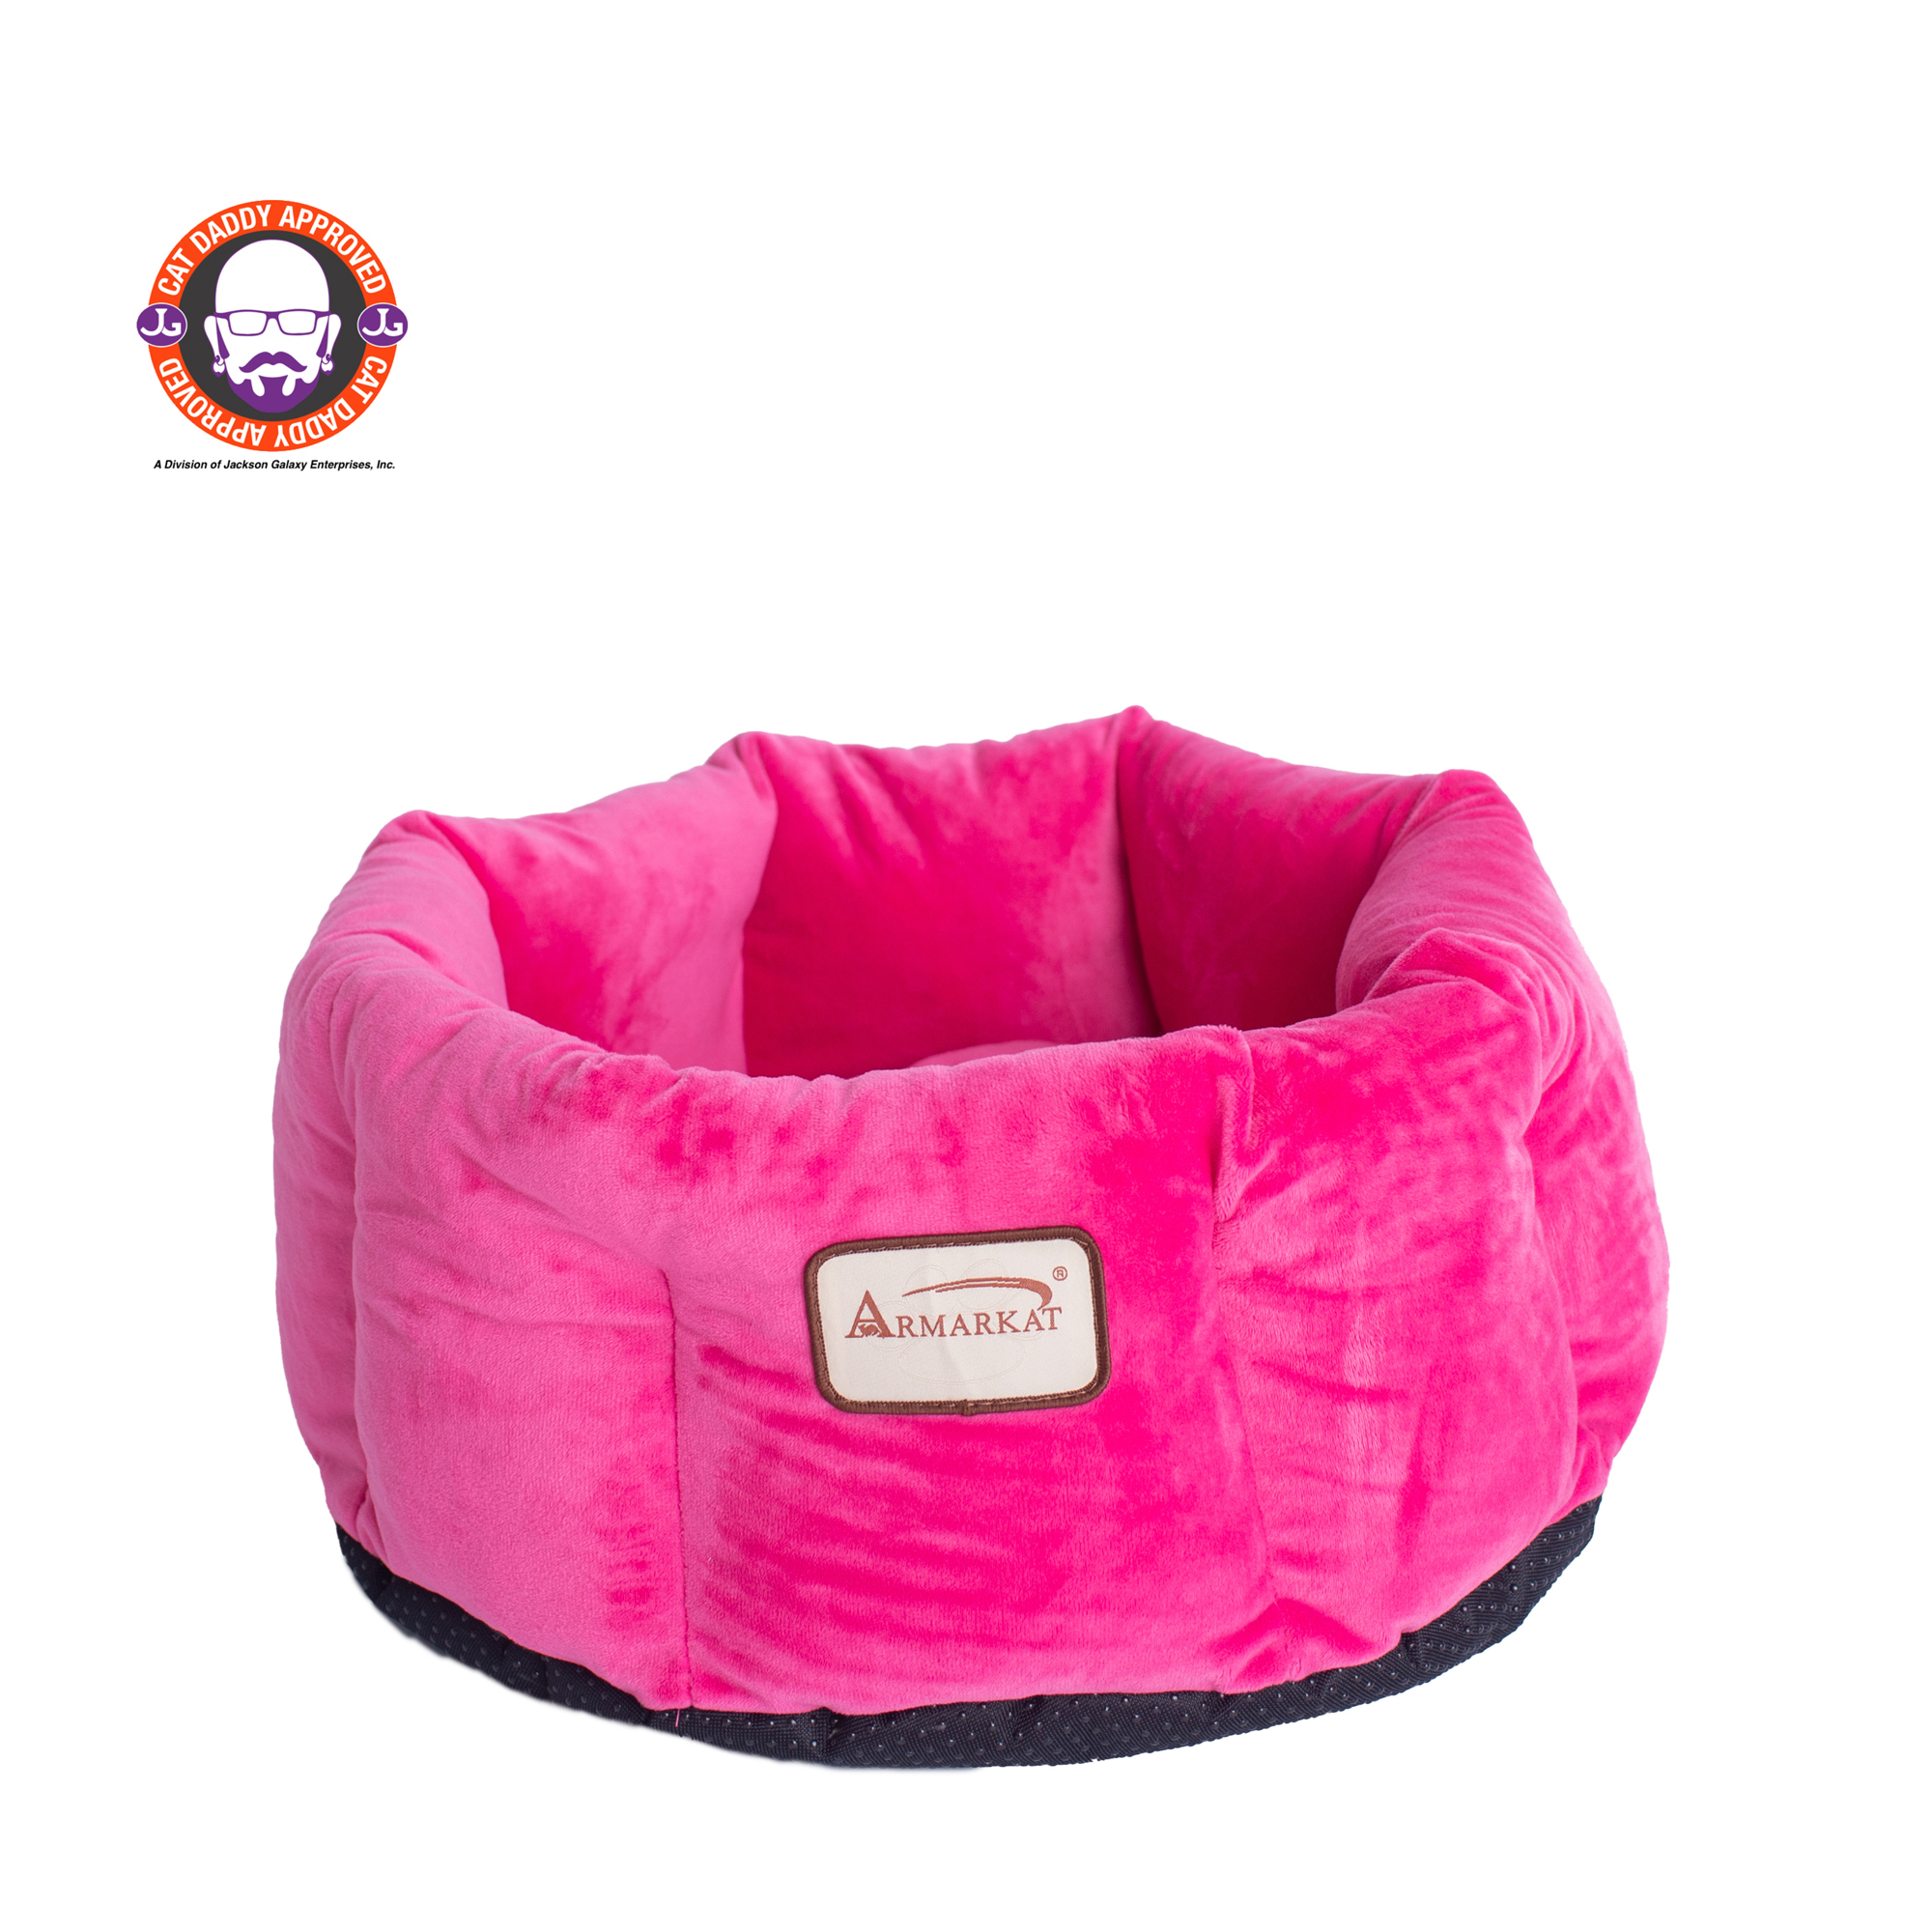 Picture of Aeromark C03CZH Armarkat Pet Bed Cat Bed 15 x 15 x 7 - Pink